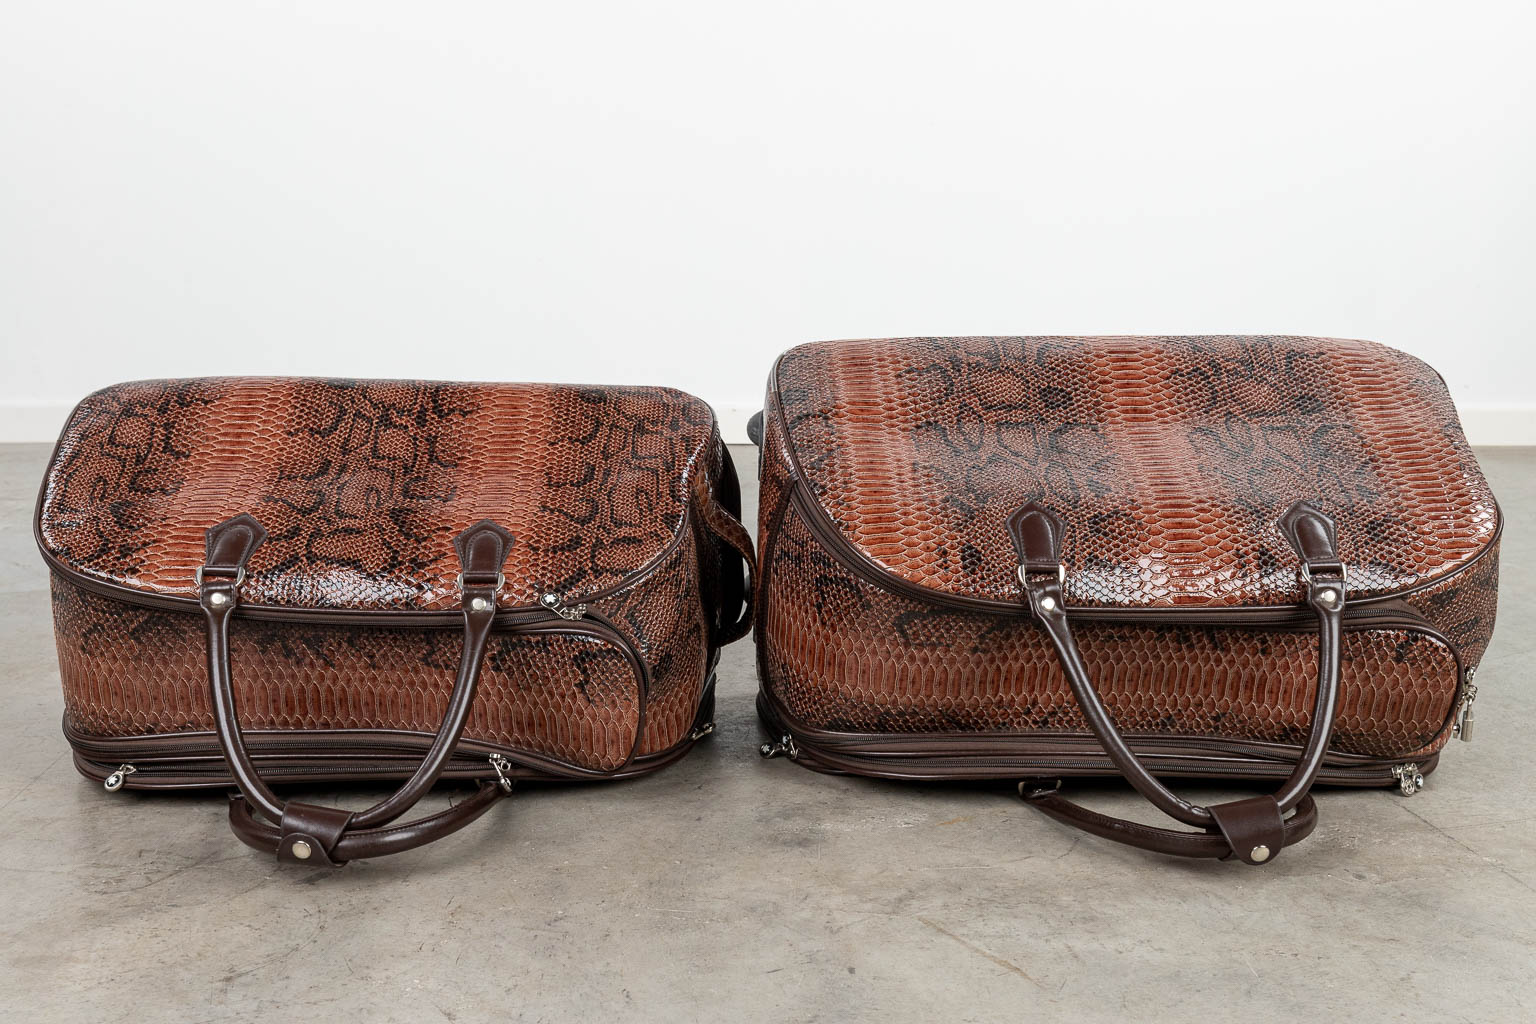 A set of 2 travel bags made of leather by Montblanc. (H:34cm)